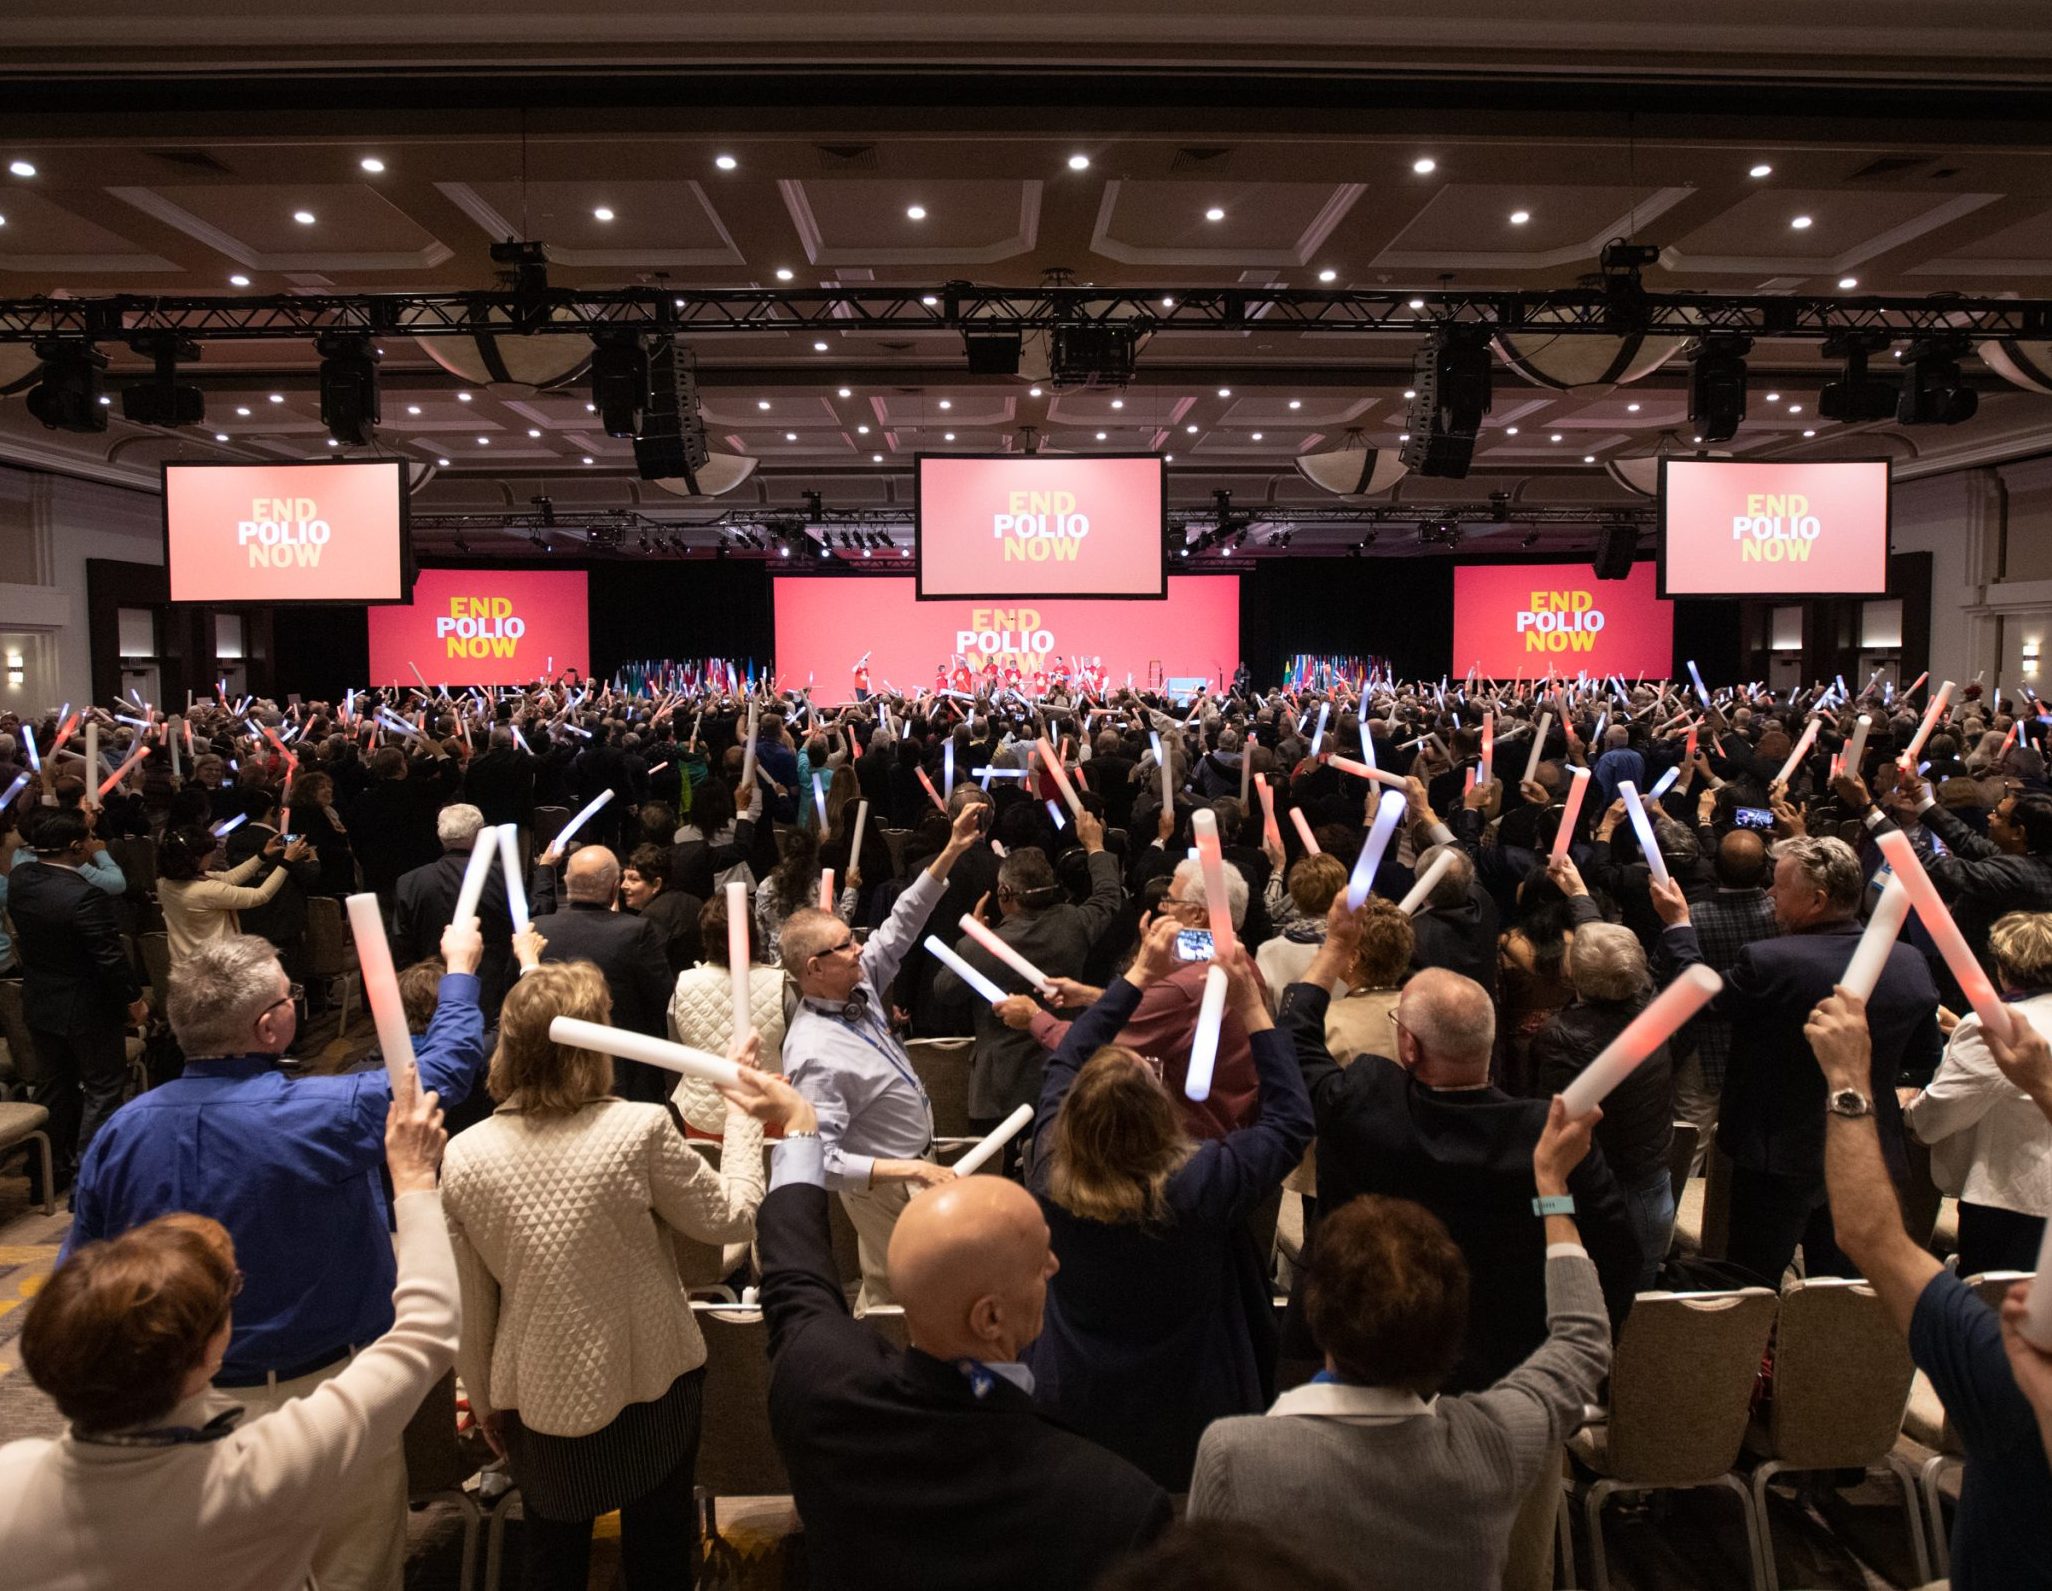 Attendees celebrate the announcement that Rotary and the Bill & Melina Gates Foundation will extend their fundraising partnership to eradicate polio at General Session 5. International Assembly, 22 January 2020, San Diego, California, USA.